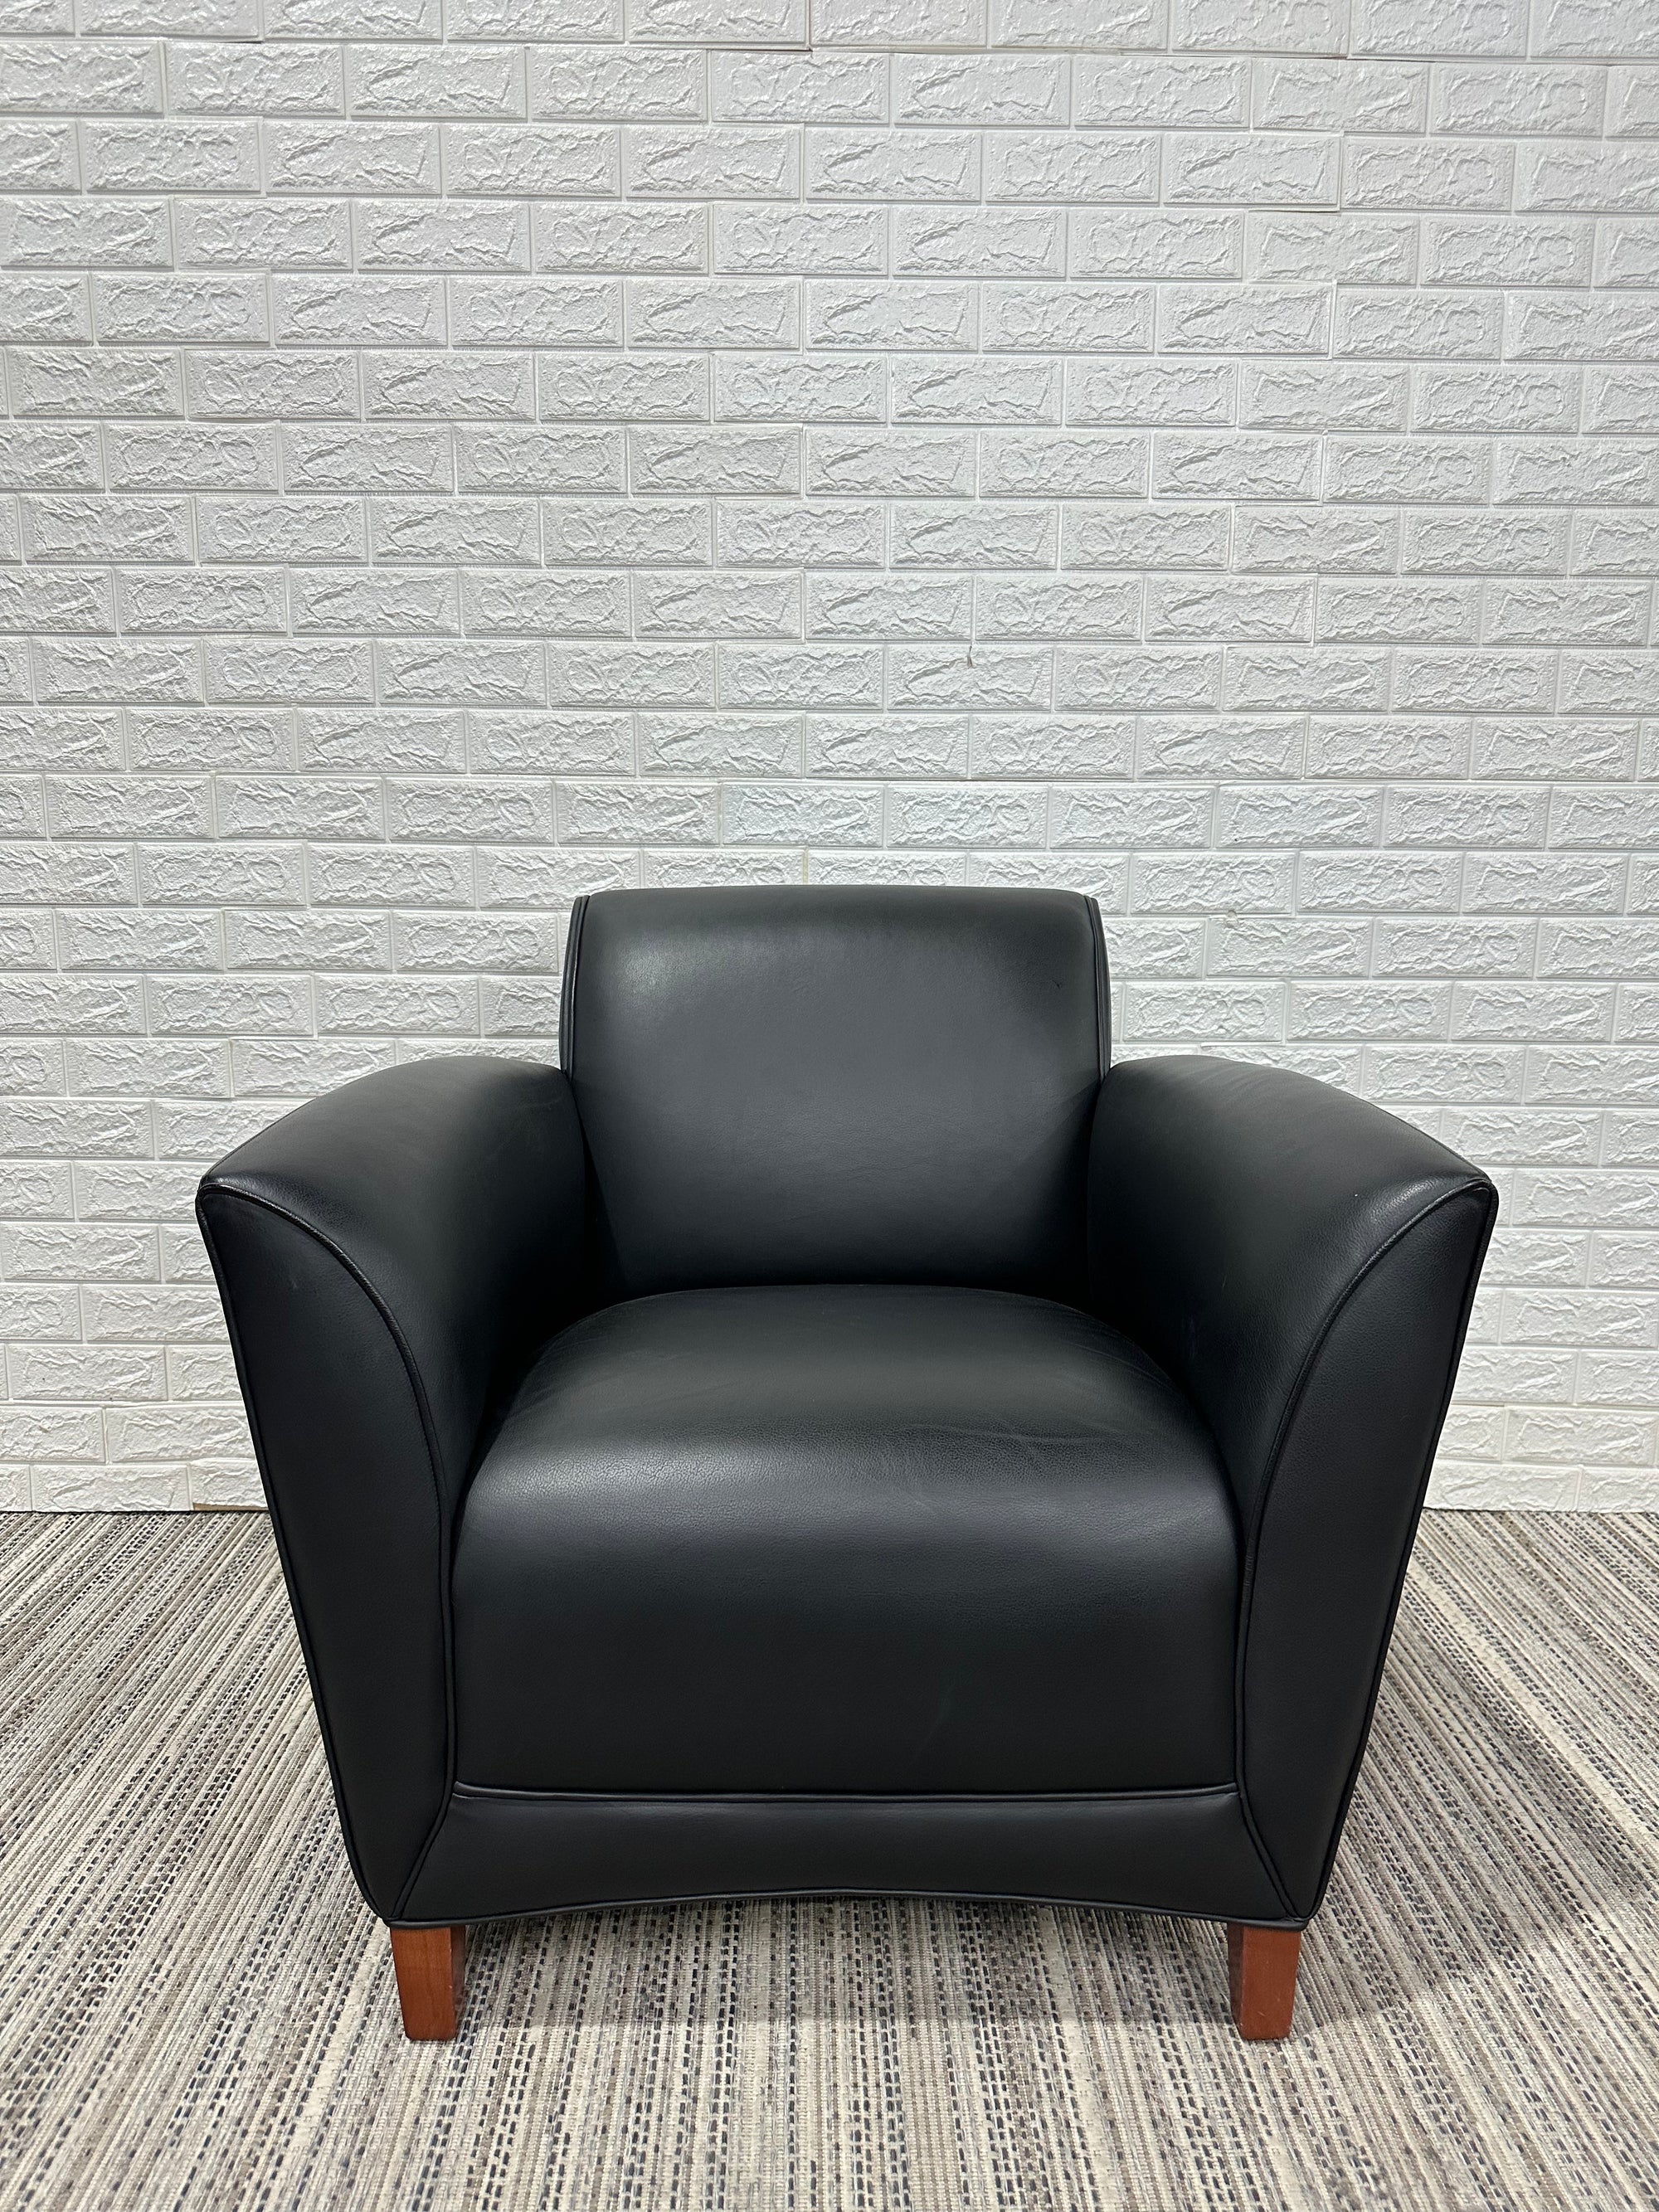 Pre-Owned Leather Chair - Duckys Office Furniture